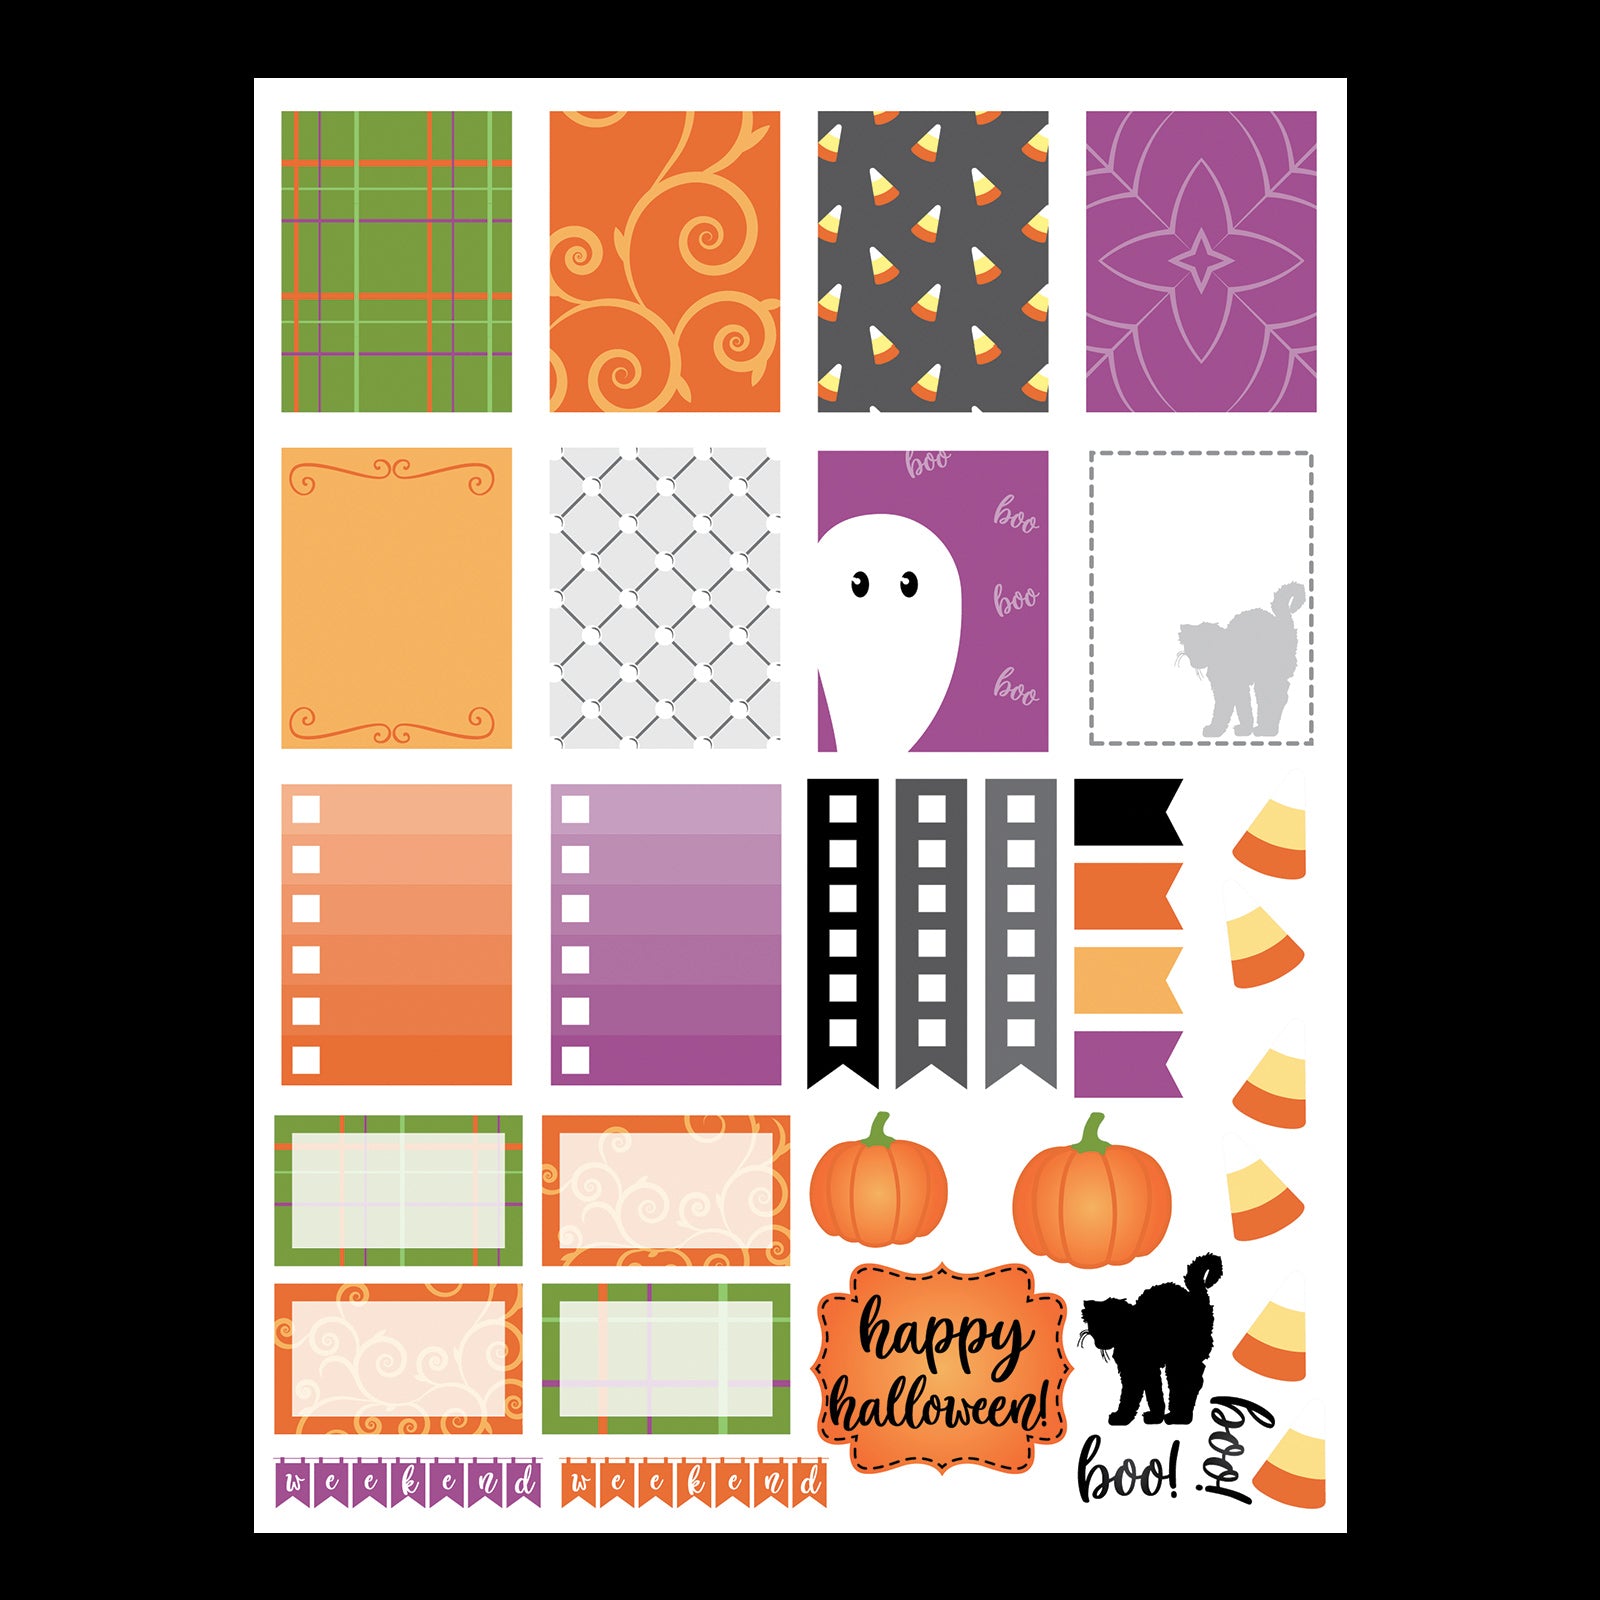 Monthly Freebie - October Planner Stickers in png and pdf formats to get you in the Halloween mood - Free for Personal Use